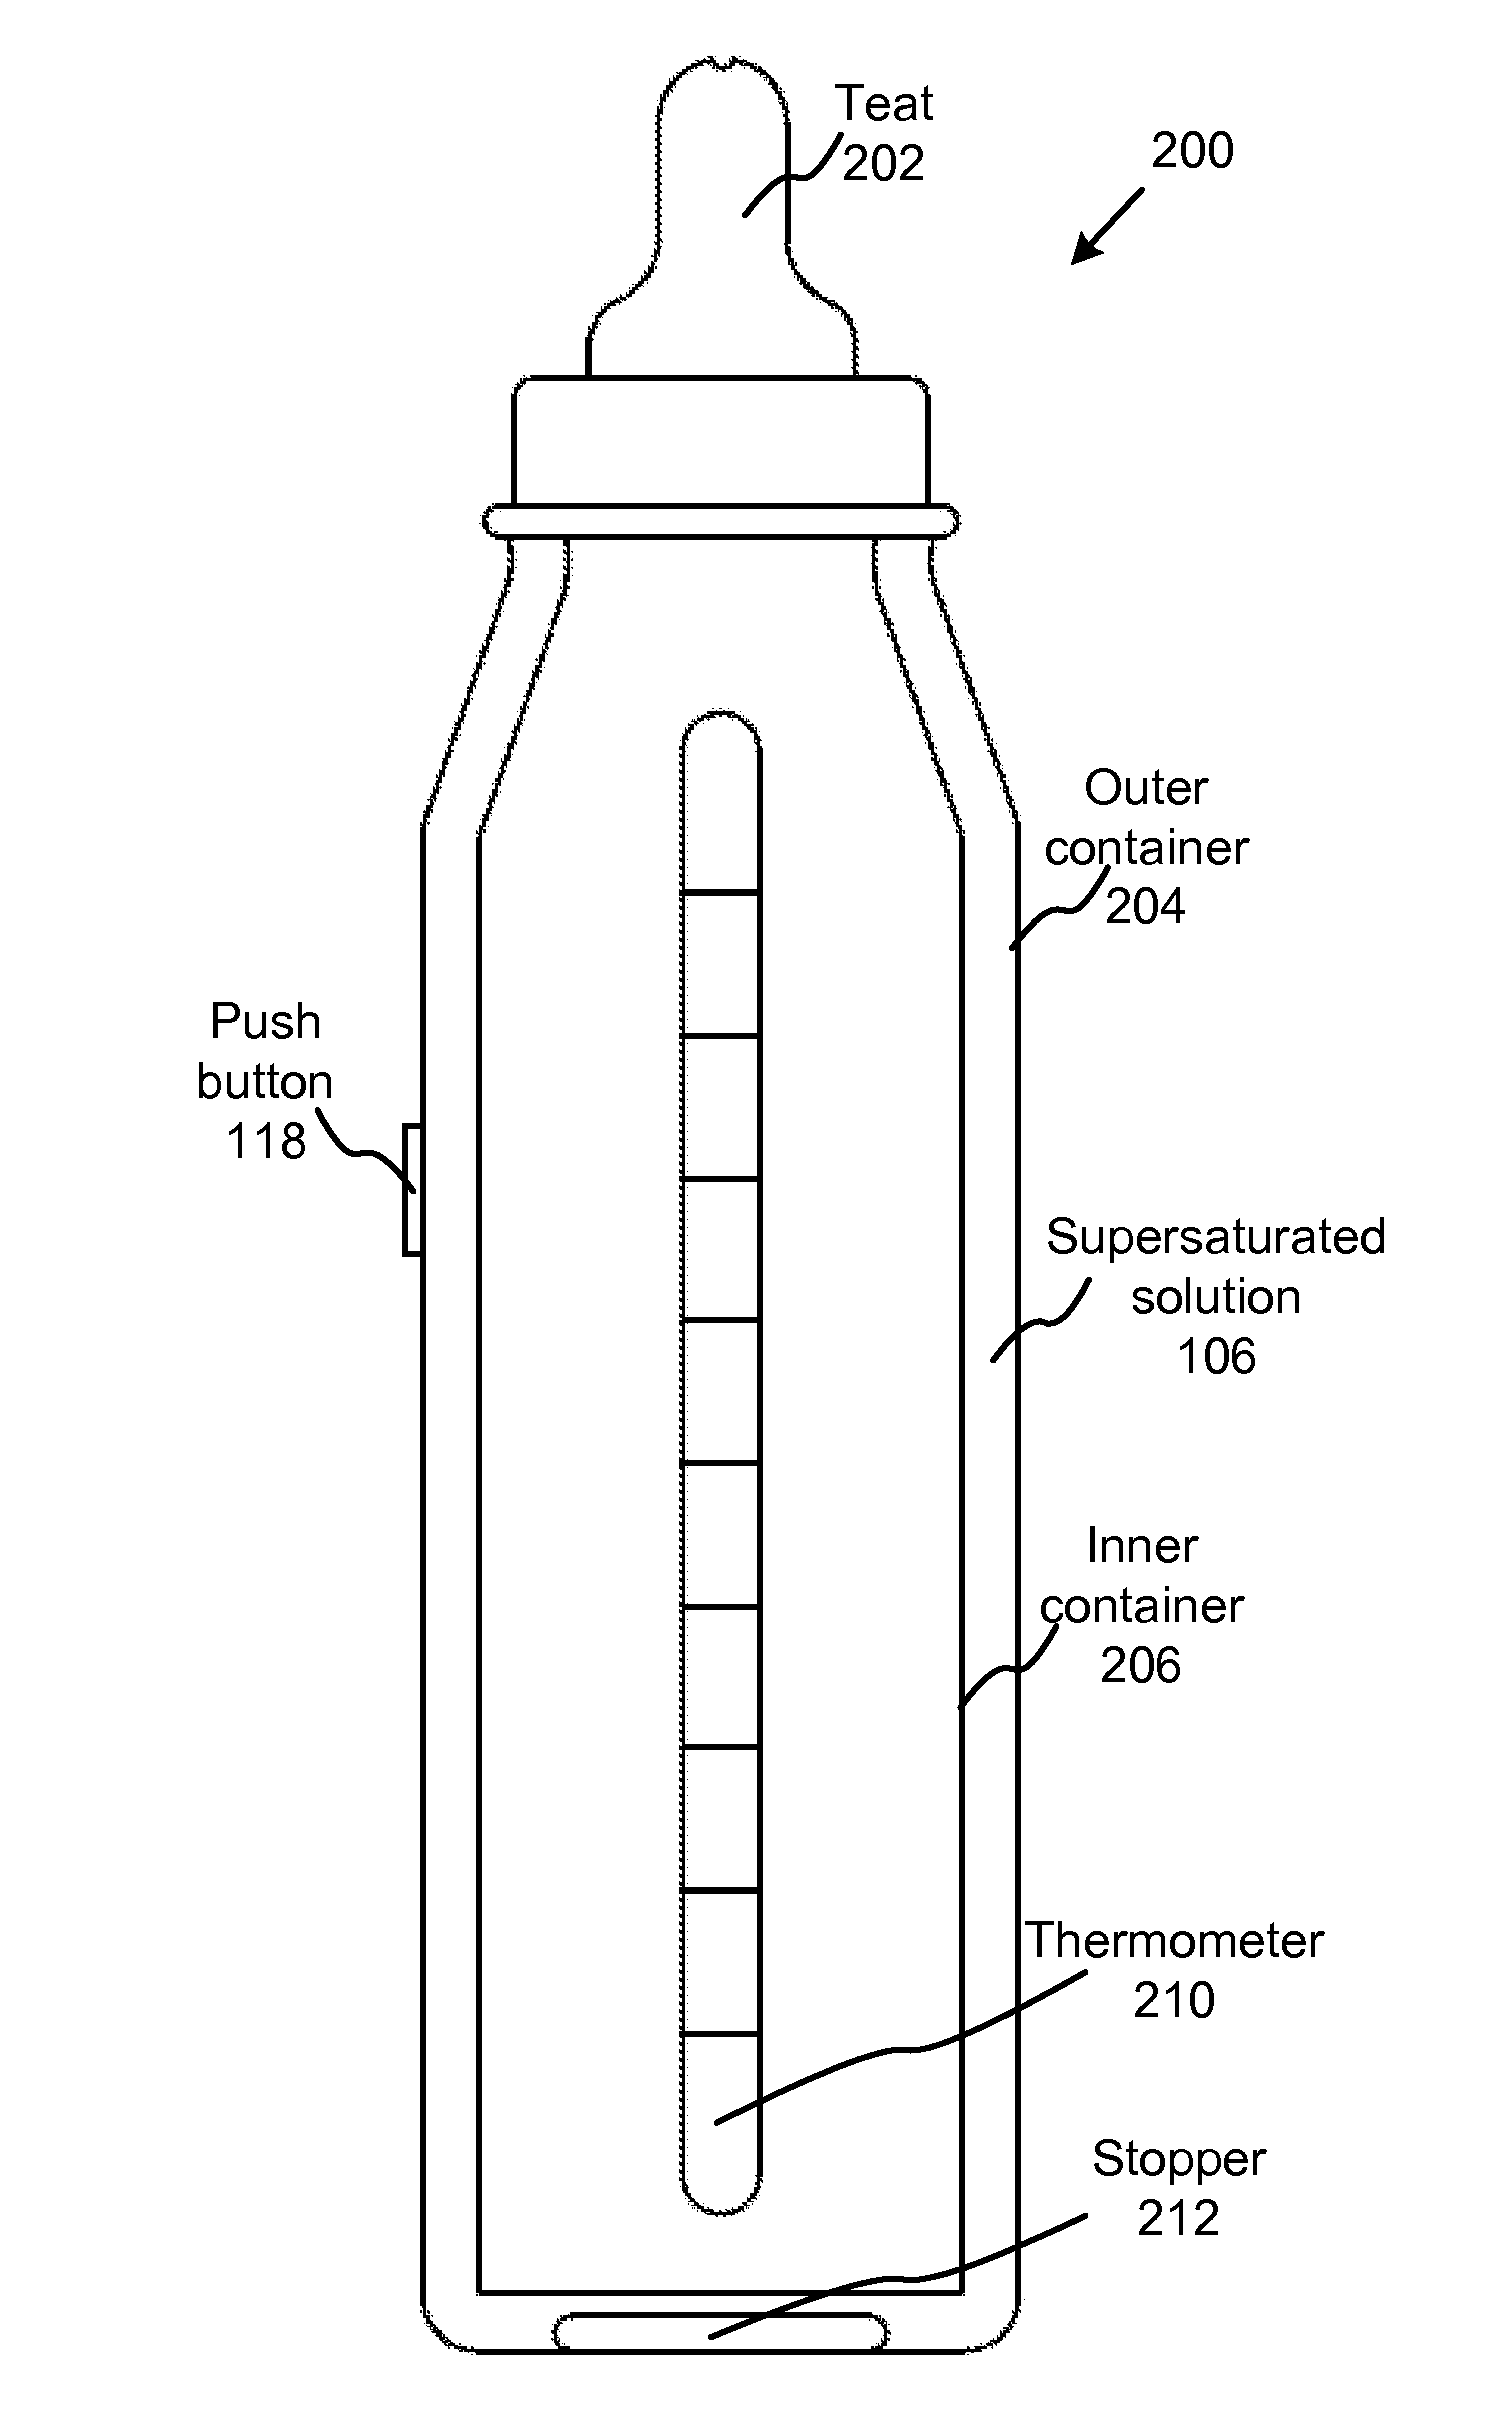 Insulated reusable self-warming beverage and food container